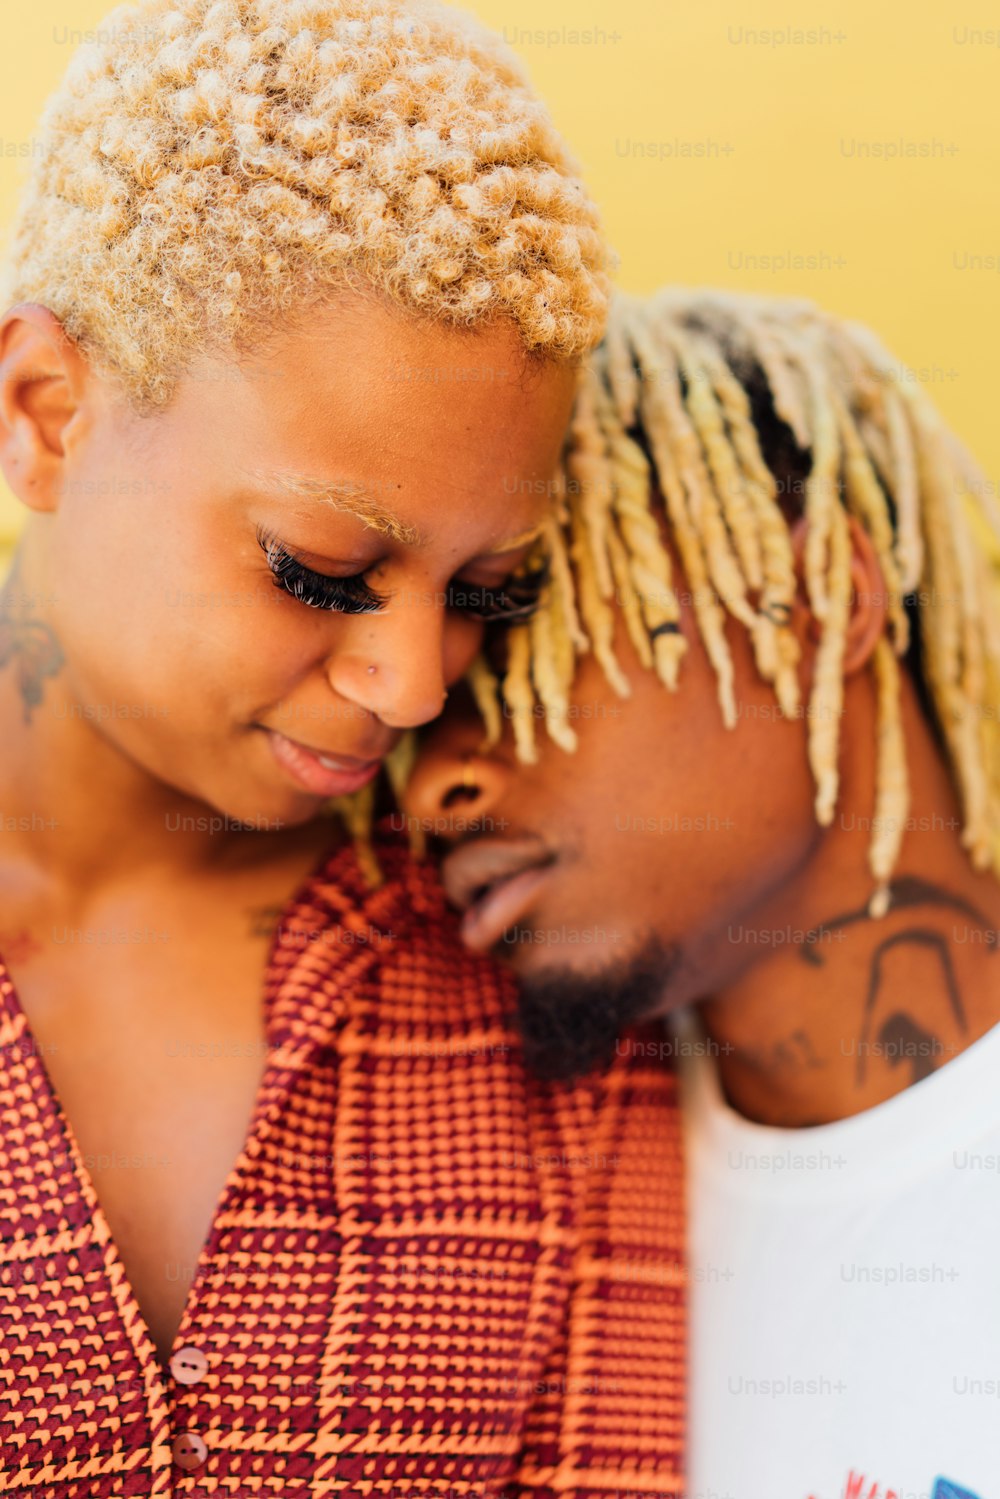 a man and a woman with dreadlocks looking at a cell phone